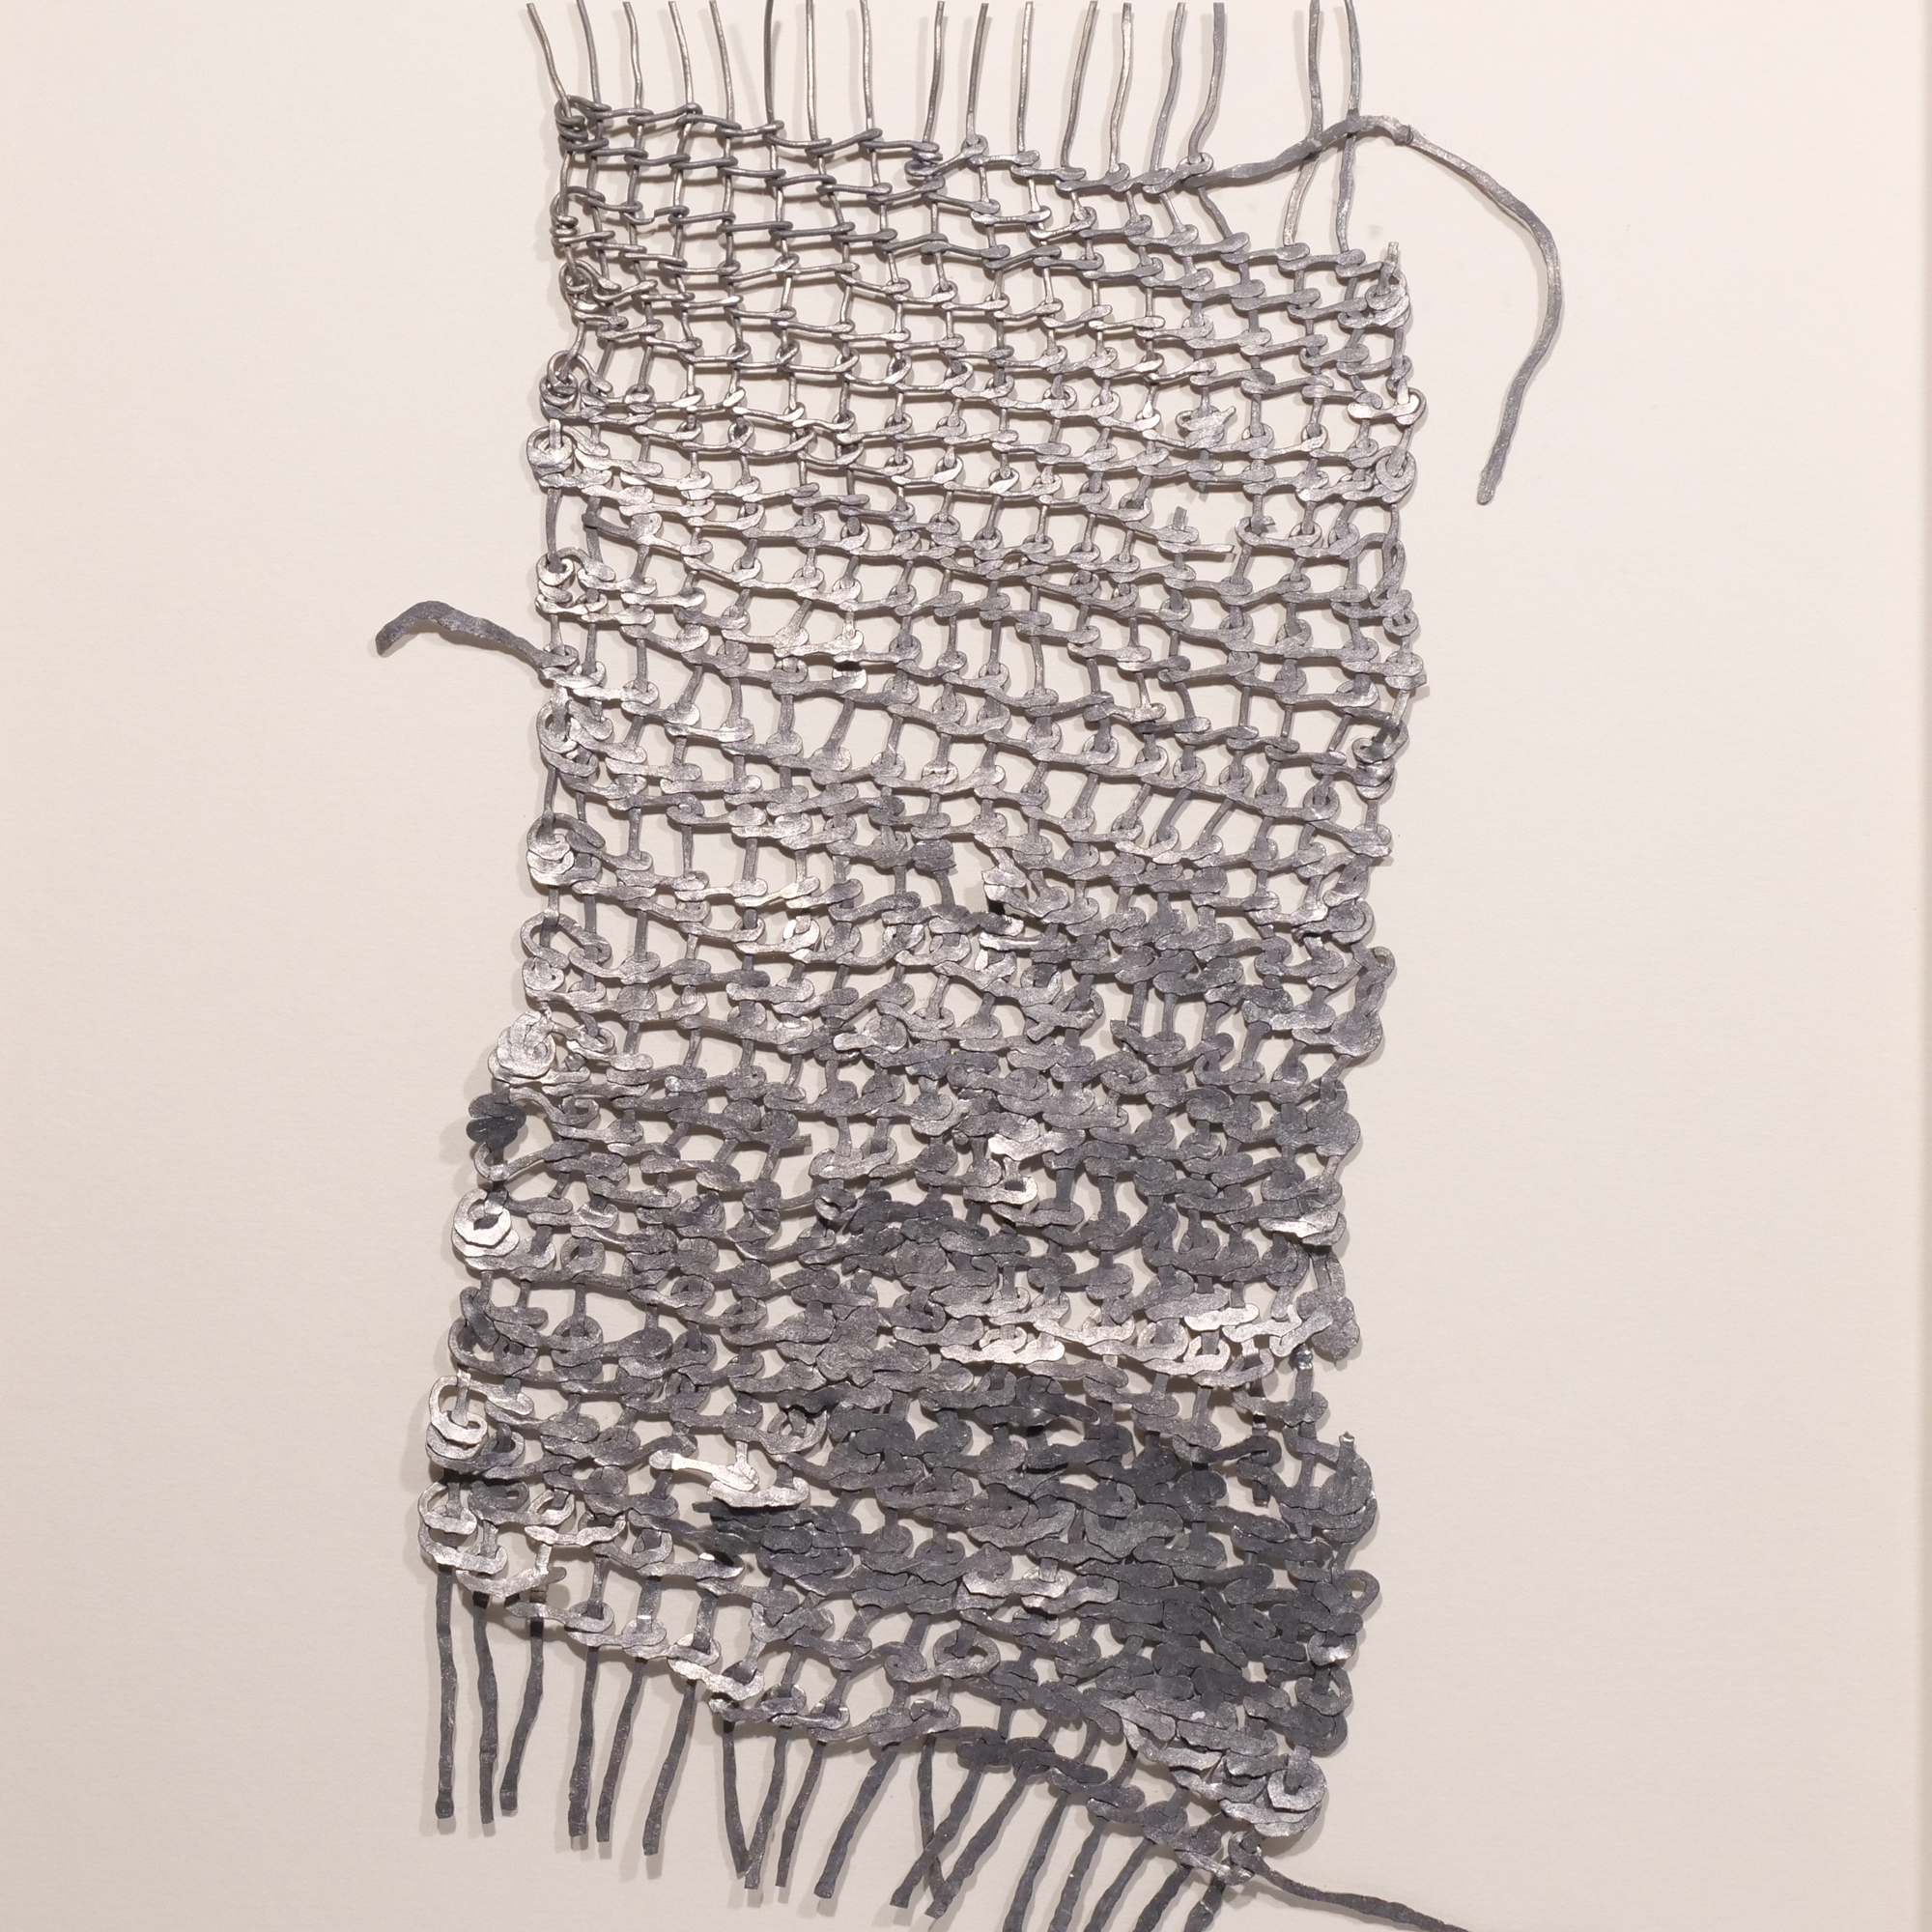 Artwork by Sue Lawty, Untitled, 2007, Made of metallic